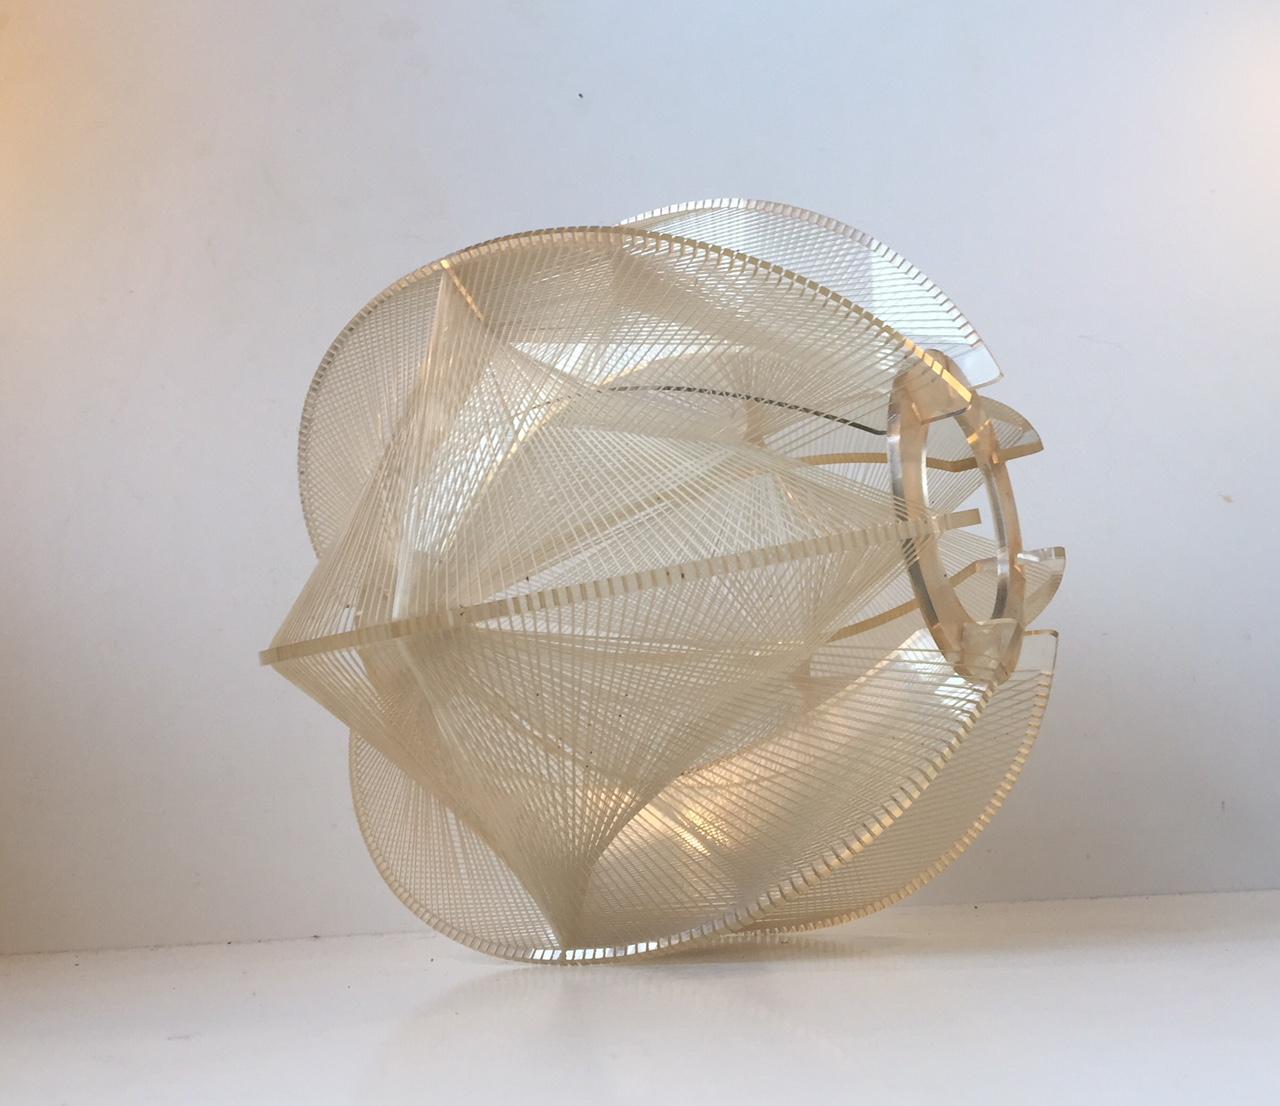 Graphic midcentury ceiling lamp designed by Paul Secon and manufactured by Sompex in Germany during the 1960s. It features a Lucite frame and has Nylon wires woven all around for a dramatic, graphic lighting effect.

 